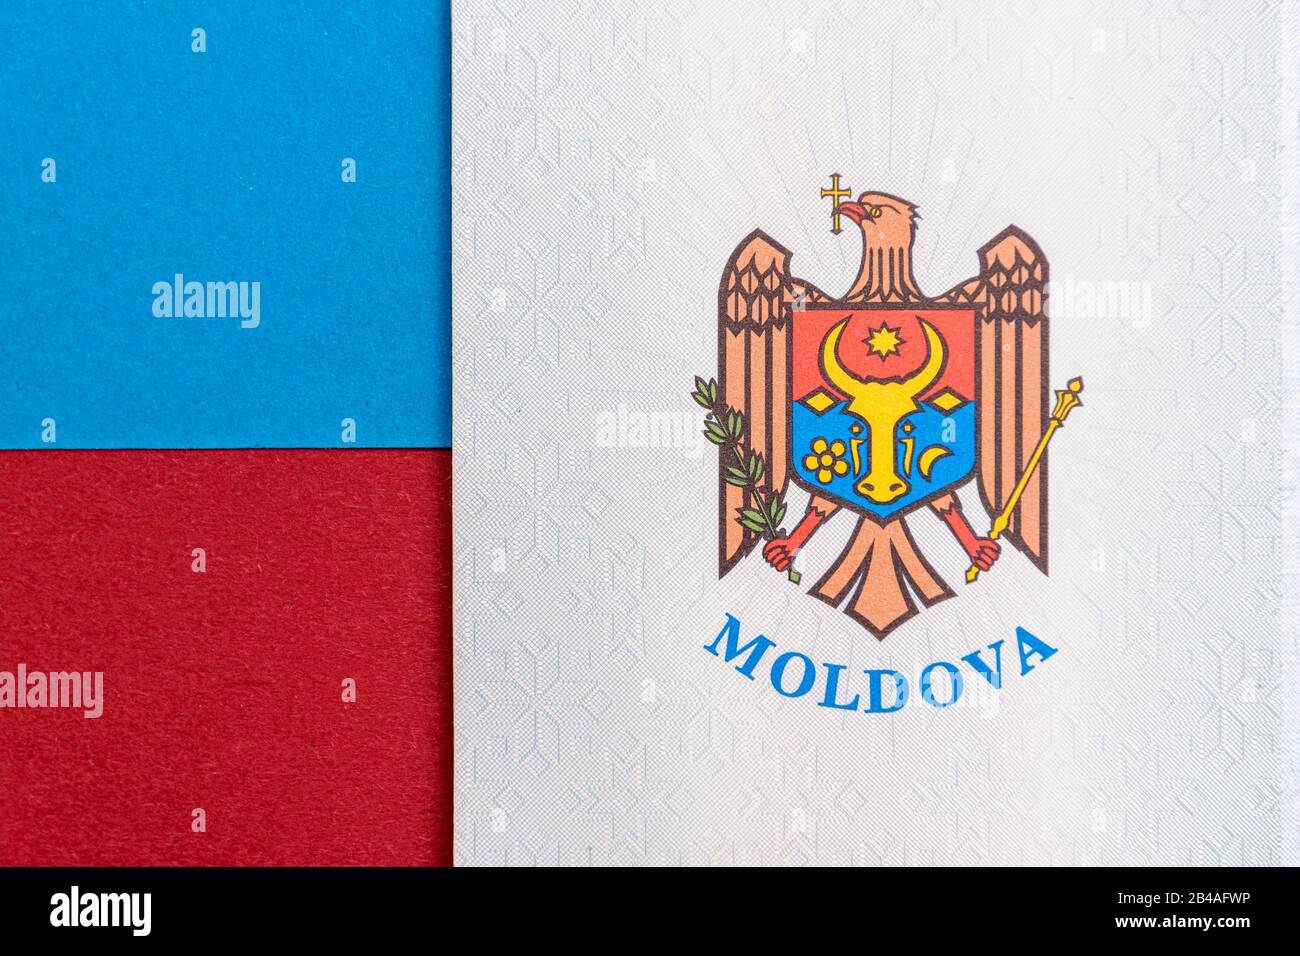 Republic of Moldova concept. The Moldovan passport on a blue and red background. Coloseup of the emblem/coat of arms of Moldova. Moldova Finance and e Stock Photo